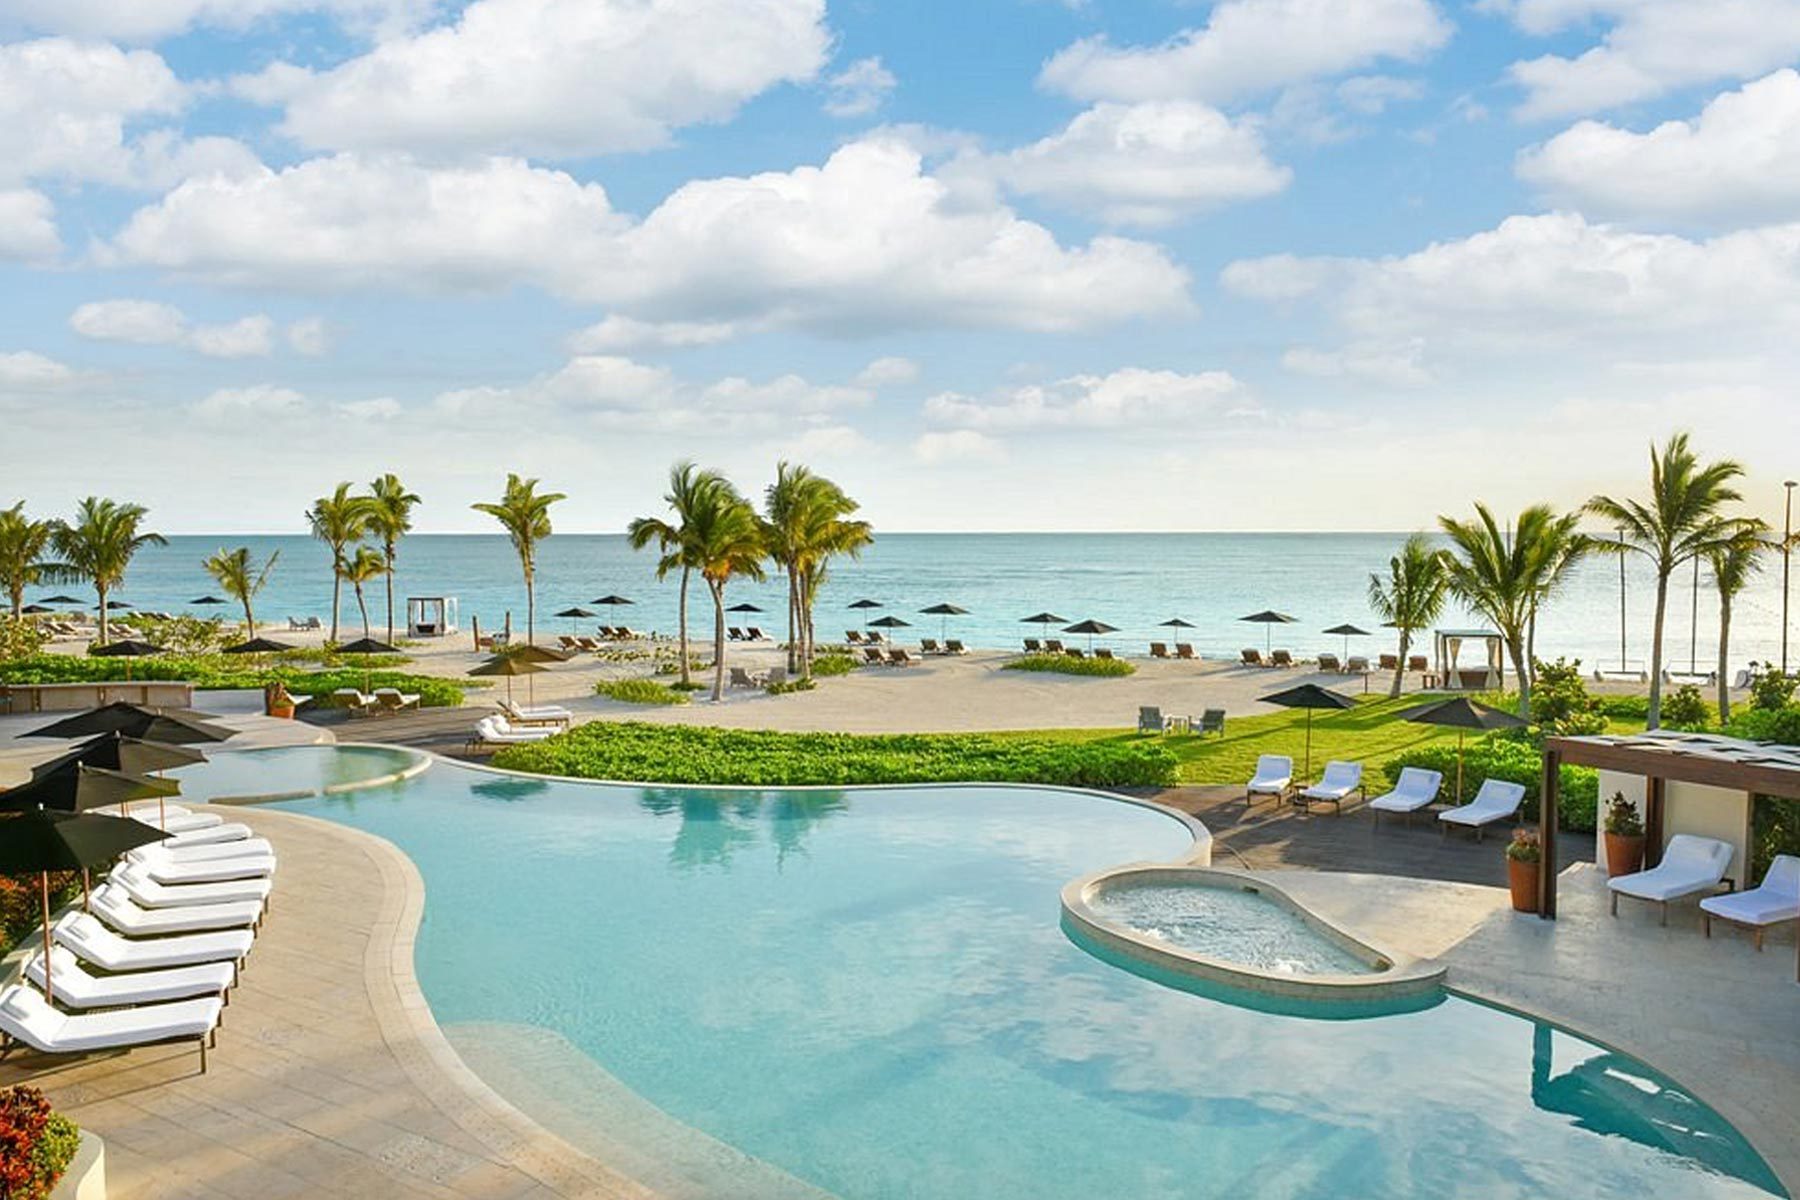 <h3 class=""><strong>Rosewood Mayakoba</strong></h3> <p>It's safe to say that the <a href="https://www.tripadvisor.com/Hotel_Review-g150812-d754465-Reviews-Rosewood_Mayakoba-Playa_del_Carmen_Yucatan_Peninsula.html" rel="noopener noreferrer">Rosewood Mayakoba</a> is one of the best resorts in Riviera Maya. Located within the 620-acre Mayakoba resort complex and flanked by winding lagoons and a mile of white-sand beaches, this oceanfront oasis is well worth a spot on your <a href="https://www.rd.com/list/hotel-rooms-with-views/" rel="noopener noreferrer">hotel bucket list</a>. All 129 suites feature plunge pools, spacious outdoor showers and decks for lounging alfresco; meanwhile, the personalized butler service is an incredible bonus.</p> <p>If you're able to lure yourself away from your private pool—it's worth it!—consider soaking up the sun on the beach or checking out other resort amenities, such as a championship golf course and non-motorized water sports. There are eight restaurants to choose from, and I got the chance to sample some signature dishes from the resort's oceanfront beach clubs, Aqui me Quedo and Punta Bonita, as part of a pop-up in New York this summer. Some personal favorites include the mixed seafood ceviche, shrimp tacos and corn ribs—which are even more delicious and refreshing when paired with signature cocktails like the Zapotaiquiri (featuring rum infused with pineapple, lime, grapefruit and celery).</p> <p>While the kids are at play at the Rosewood Explorers Club (activities include cookie-making, yoga, biologist-led boat tours and scavenger hunts), Mom and Dad can visit the <a href="https://www.rd.com/list/most-luxurious-spas-in-the-world/" rel="noopener noreferrer">stunning spa</a>, which is designed around a cenote and located on its own private island (yes, really!) for optimal R&R.</p> <p><strong>Pros: </strong></p> <ul> <li class="">All accommodations (suites) have private plunge pools</li> <li class="">Complimentary amenities include non-motorized water sports and personalized butler service</li> <li class="">Postcard-worthy surroundings featuring lush mangroves, lagoons and ocean views</li> </ul> <p><strong>Con:</strong></p> <ul> <li class="">A stay here is pricey—over $1,000 per night, sans food and drink</li> </ul> <p class="listicle-page__cta-button-shop"><a class="shop-btn" href="https://www.tripadvisor.com/Hotel_Review-g150812-d754465-Reviews-Rosewood_Mayakoba-Playa_del_Carmen_Yucatan_Peninsula.html">Book Now</a></p>